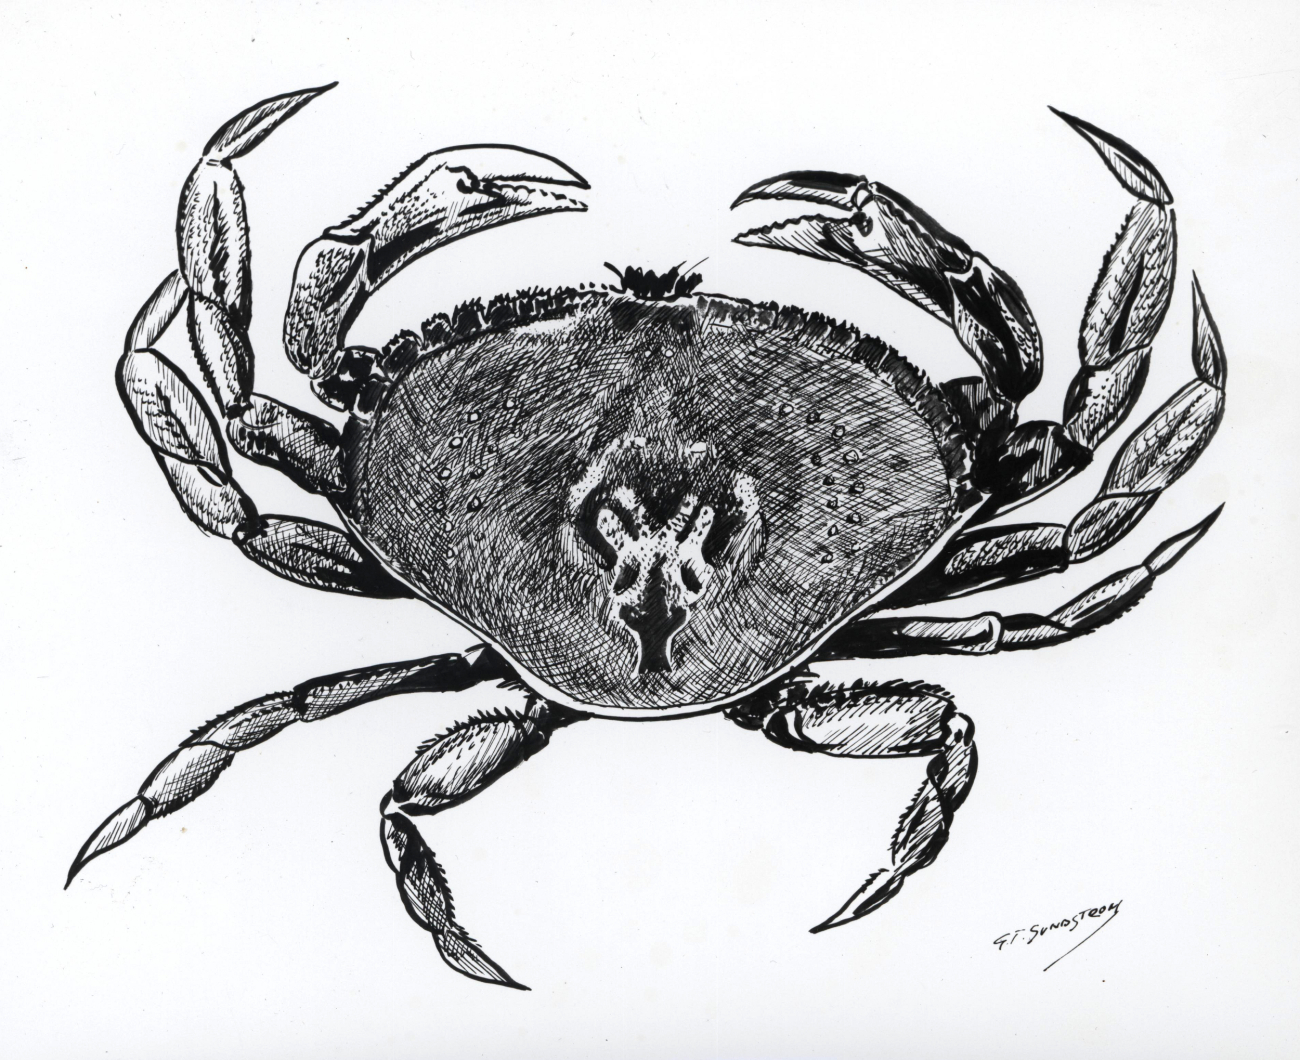 Artwork - Dungeness crab (Cancer magister) by G